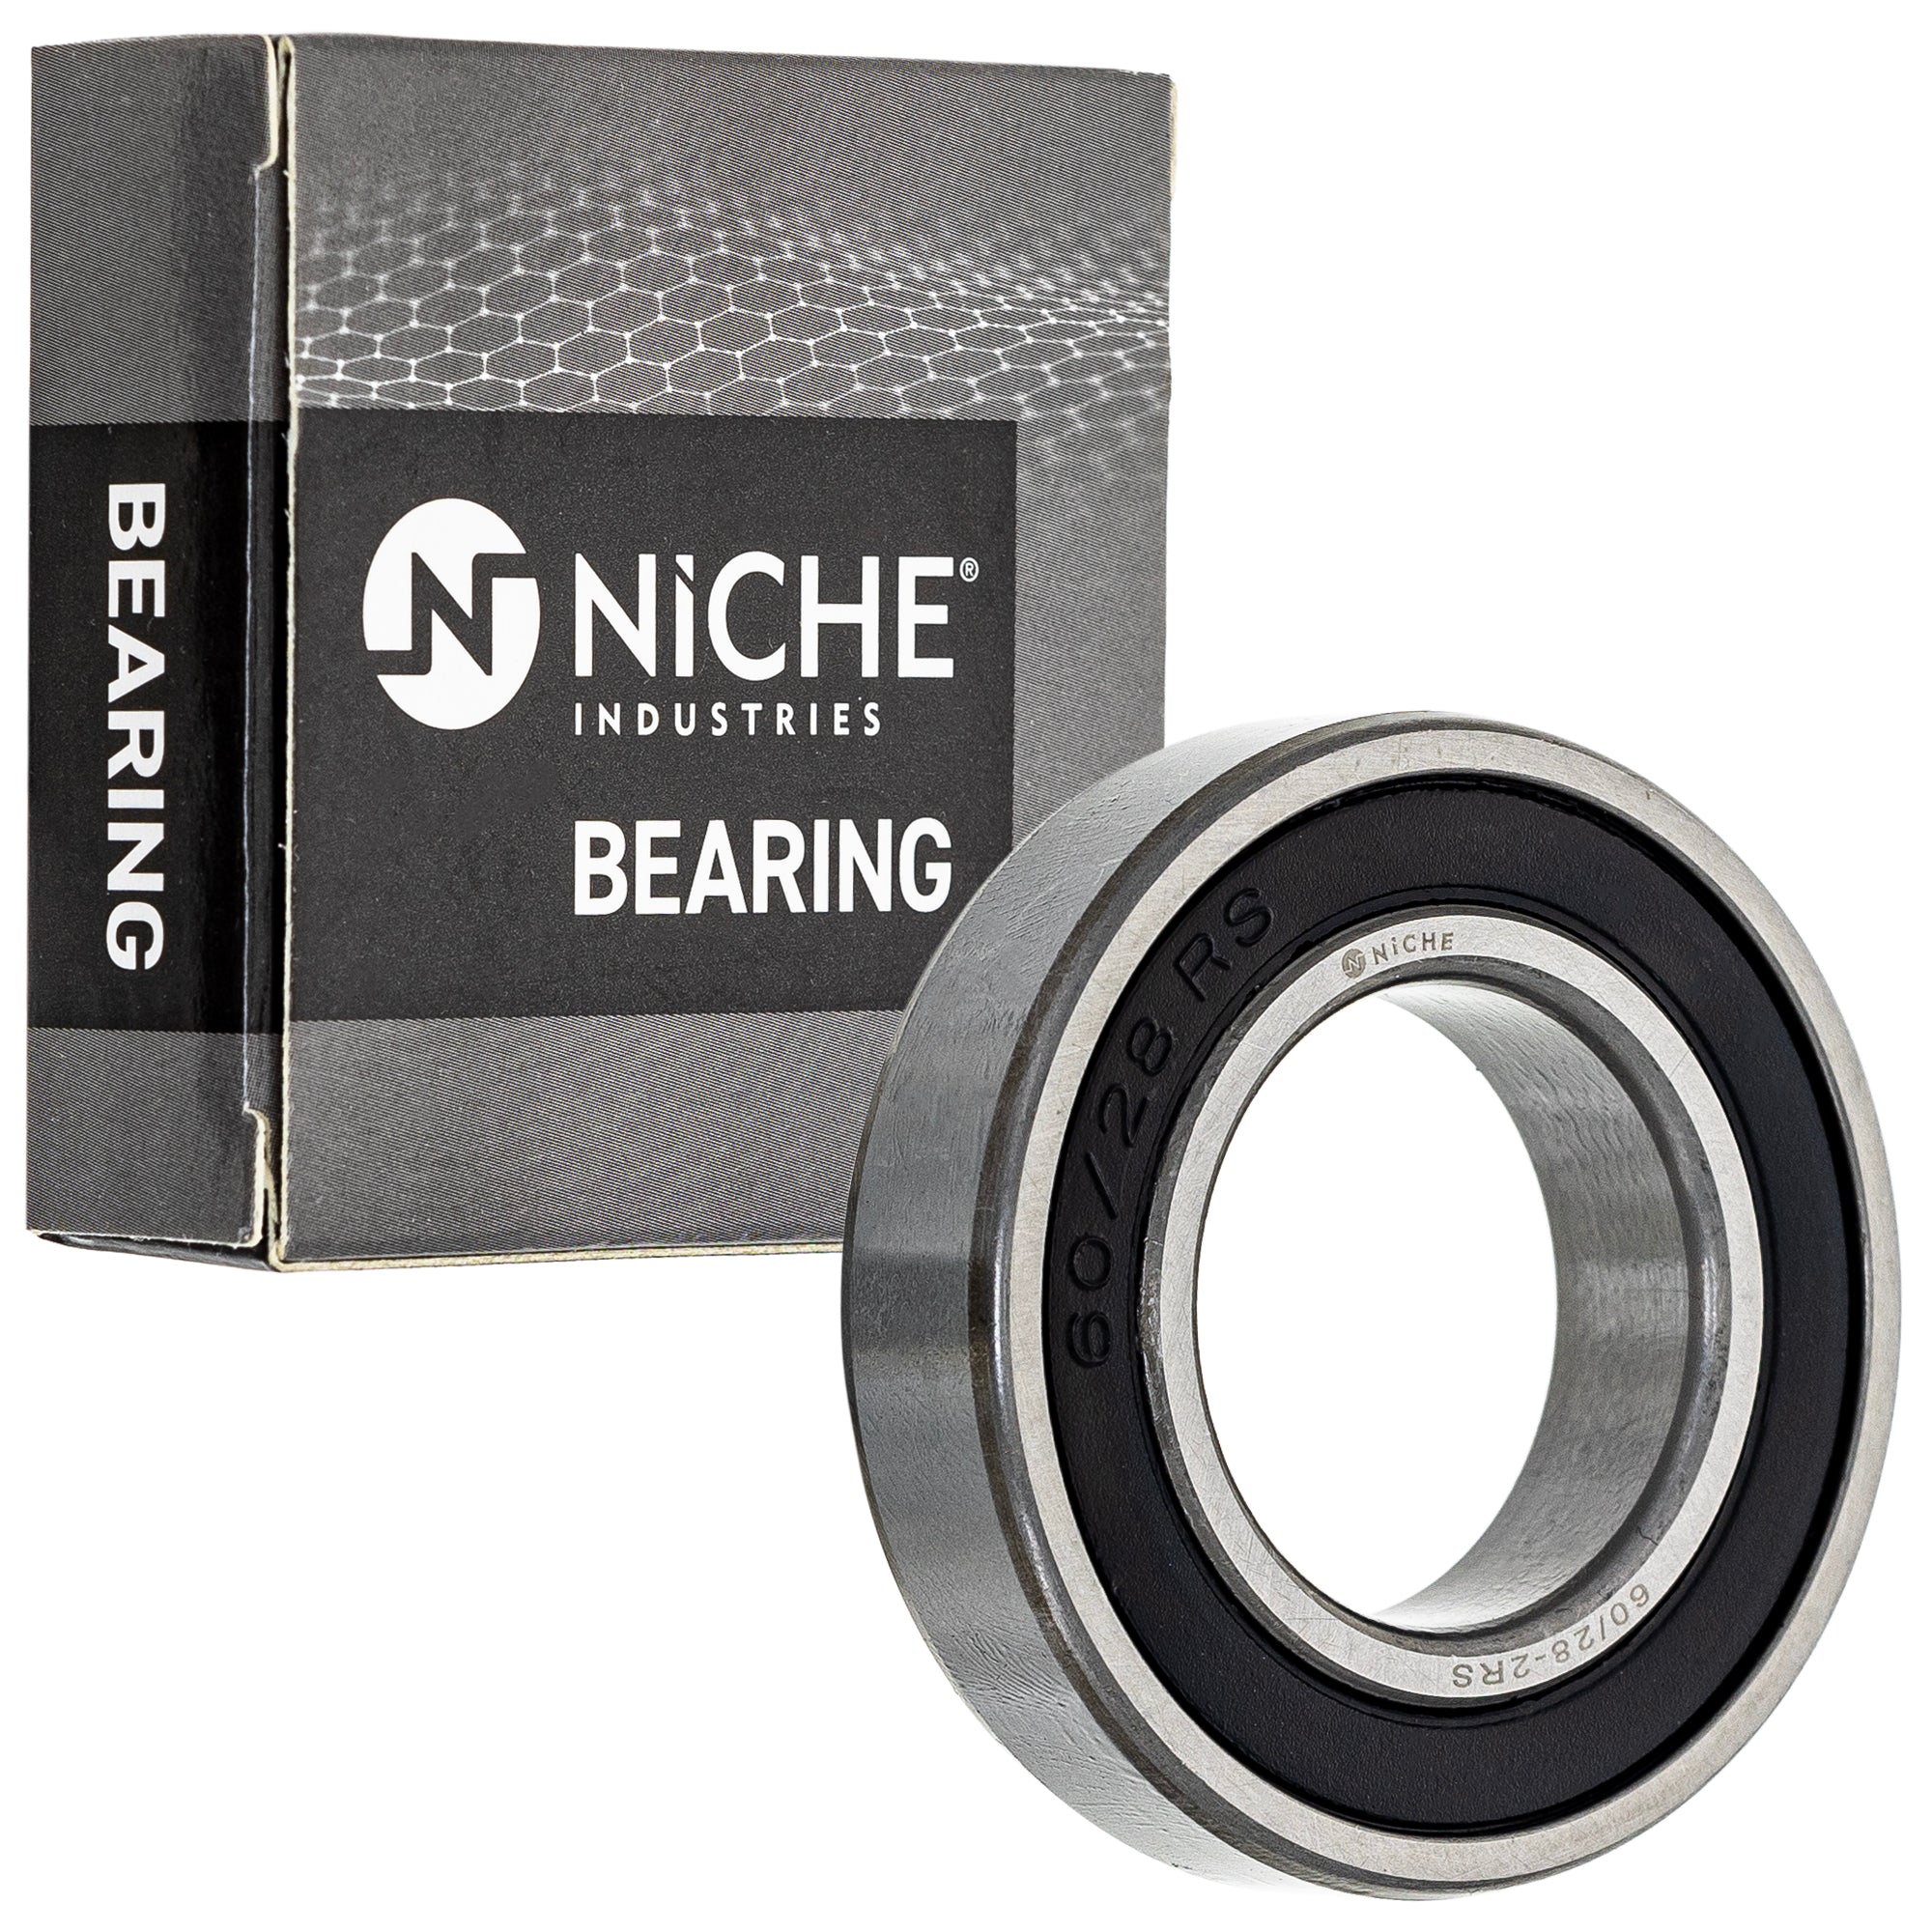 NICHE 519-CBB2264R Bearing 2-Pack for zOTHER ZZR600 Zephyr Z1000